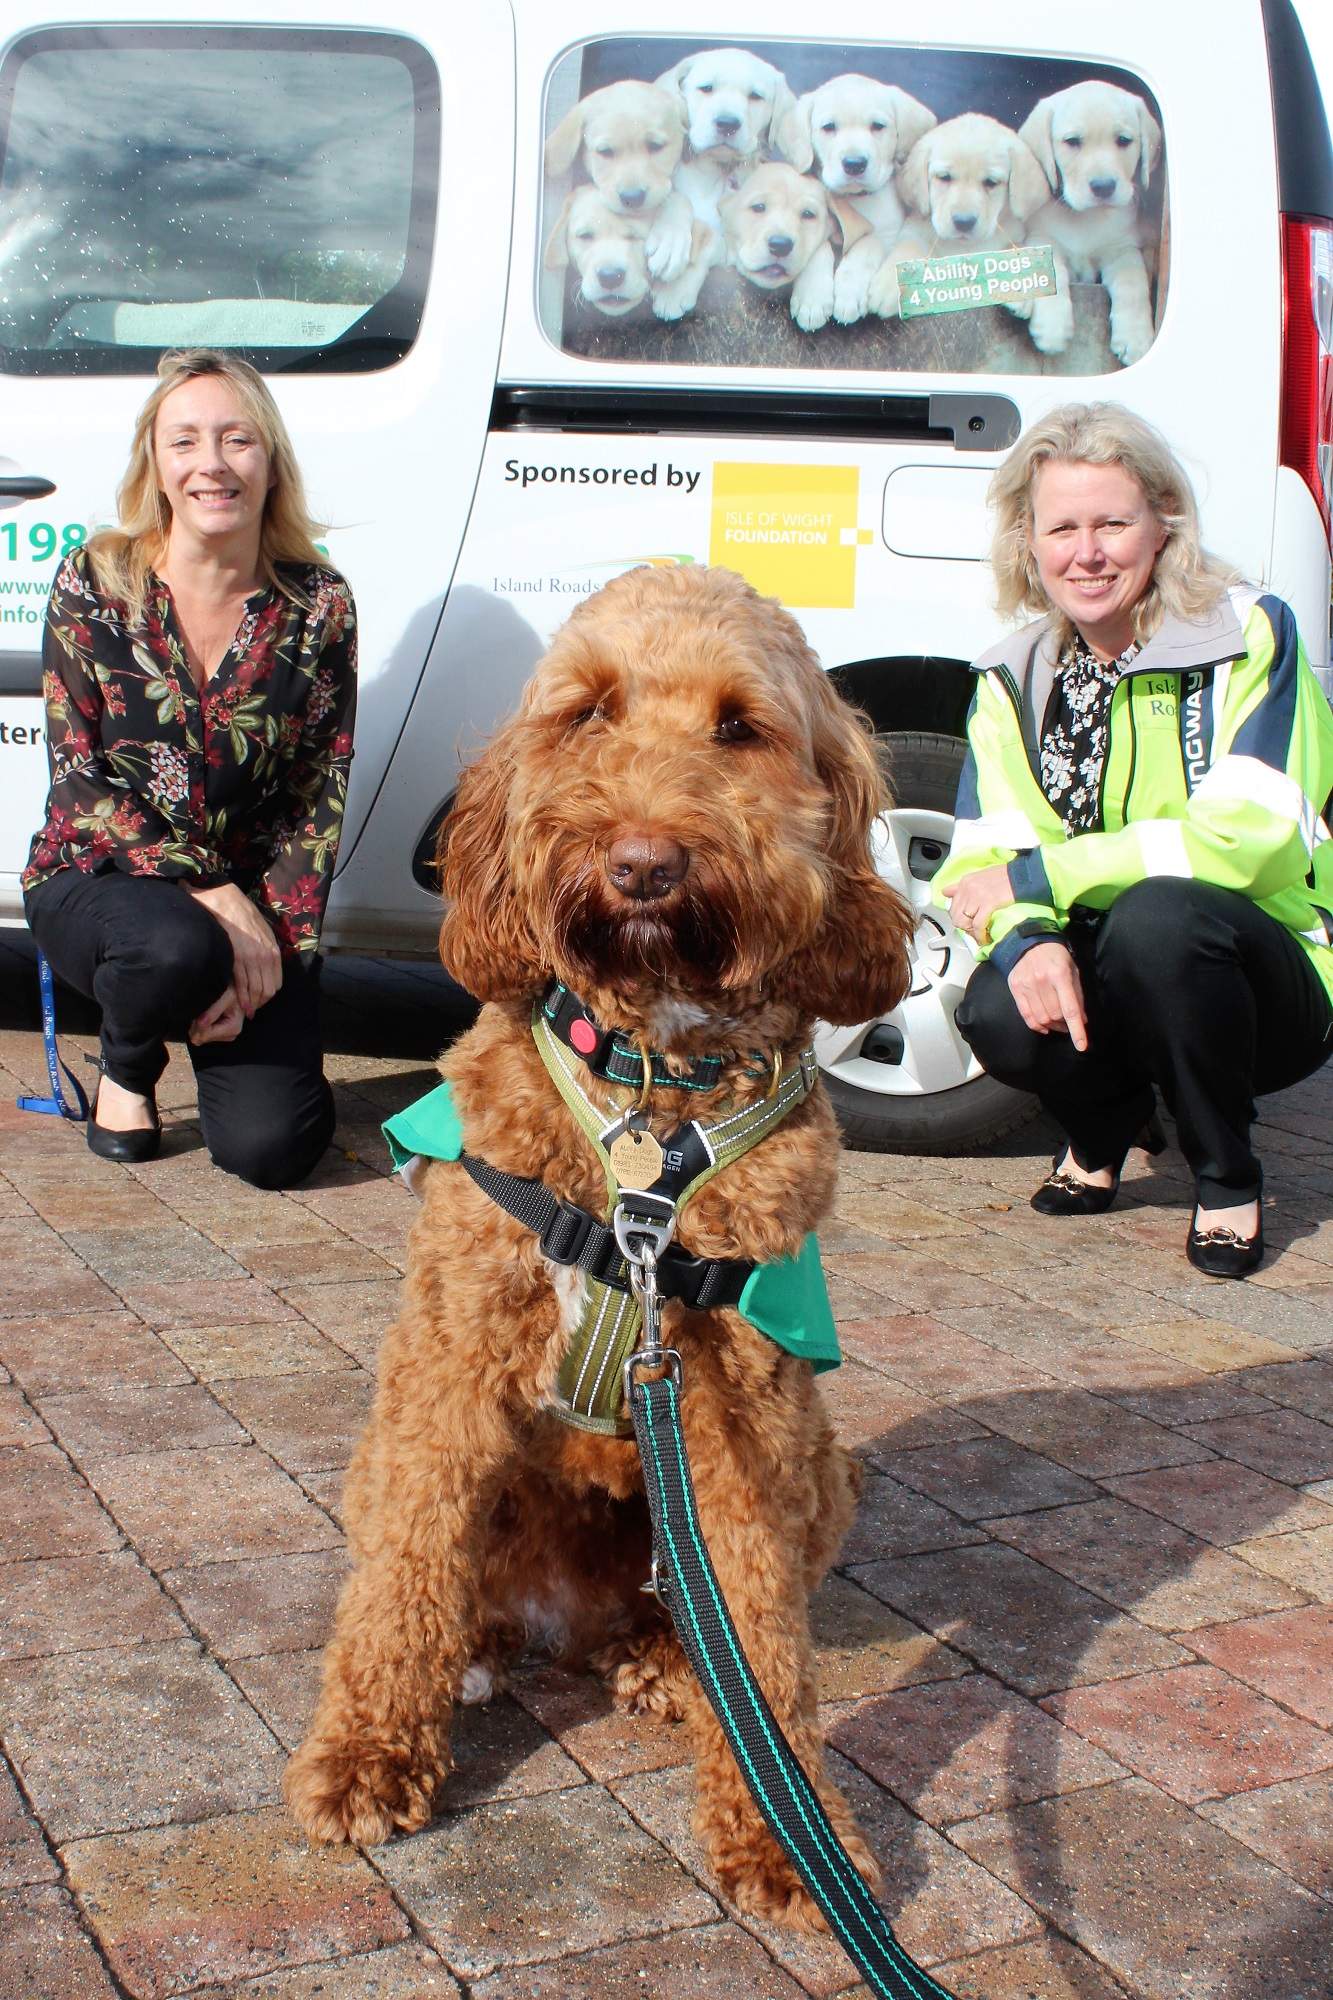 dog in front of electric vehicle with Island Road employees Samantha and Rachel